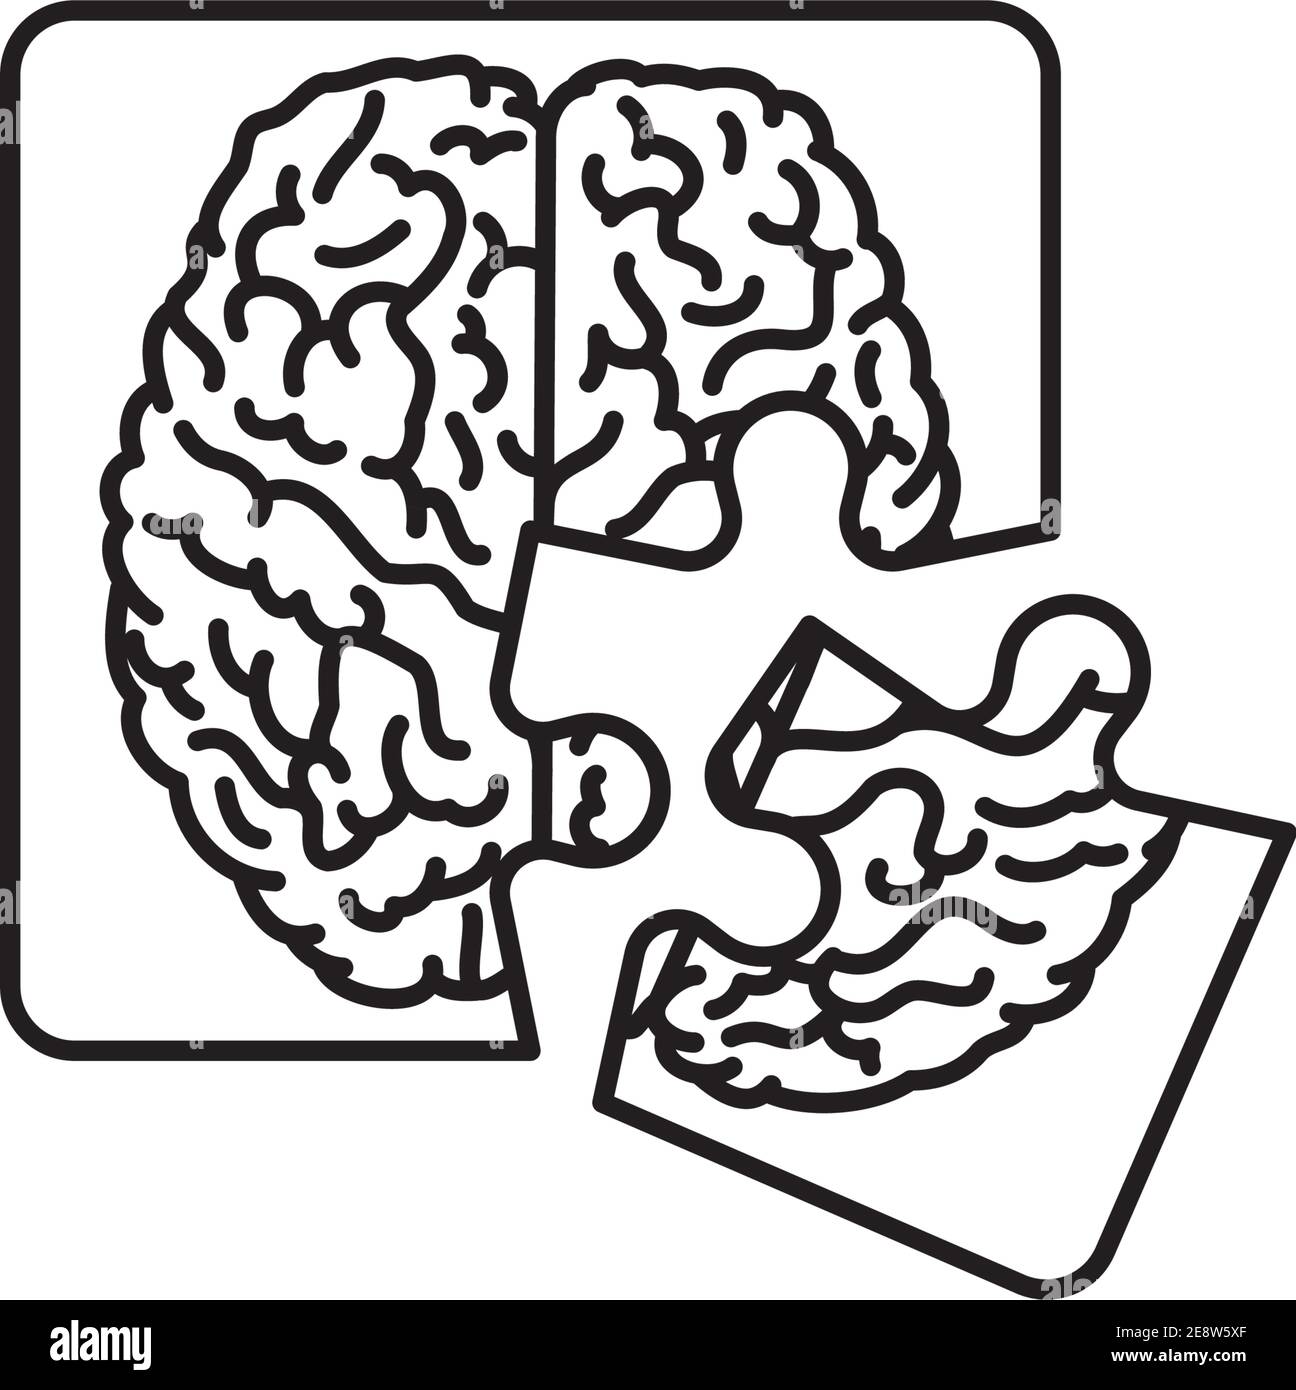 Jigsaw puzzle with brain picture vector illustration for Alzheimers Day on September 21. Loss of memory concept Stock Vector